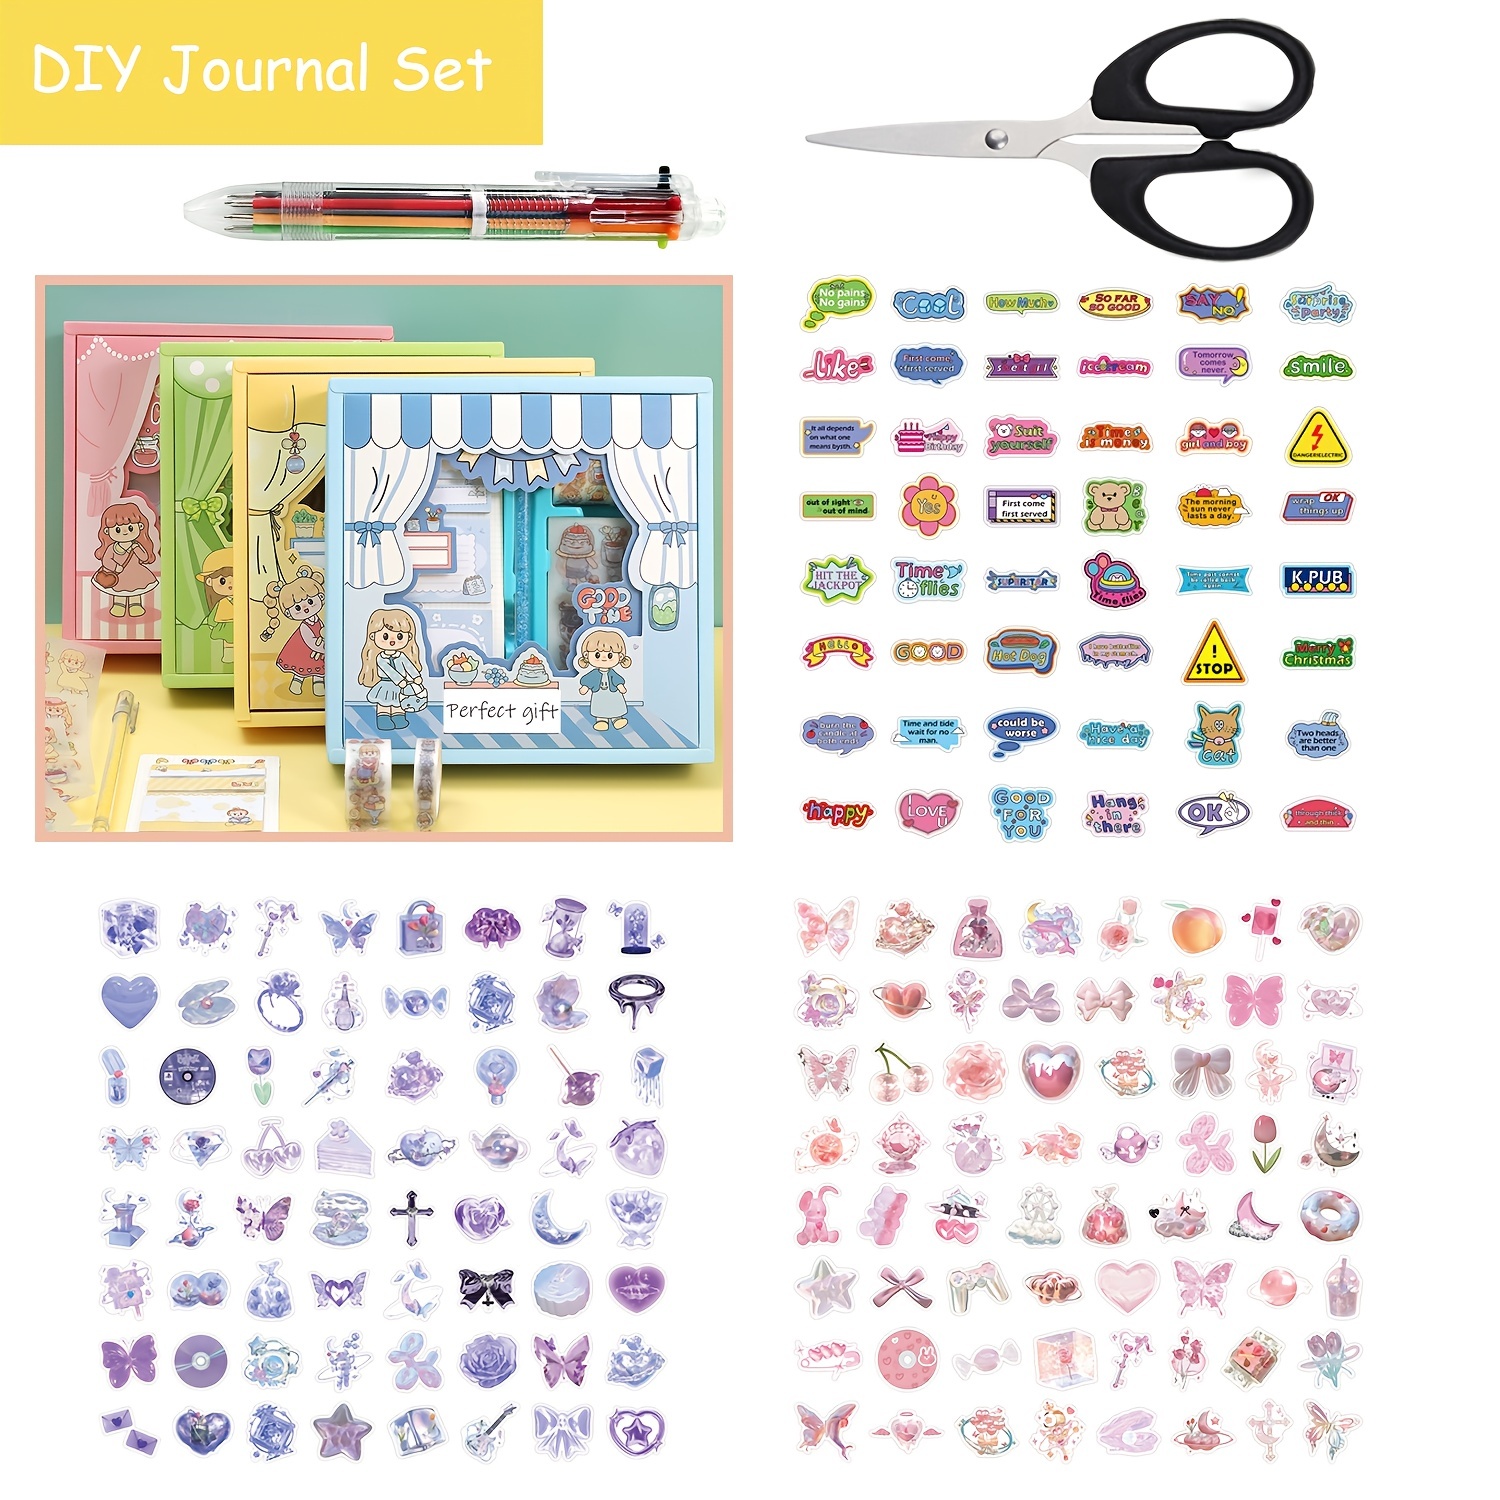 DIY Journal Kit for Girls - Great Gift for 8-14 Year Indonesia